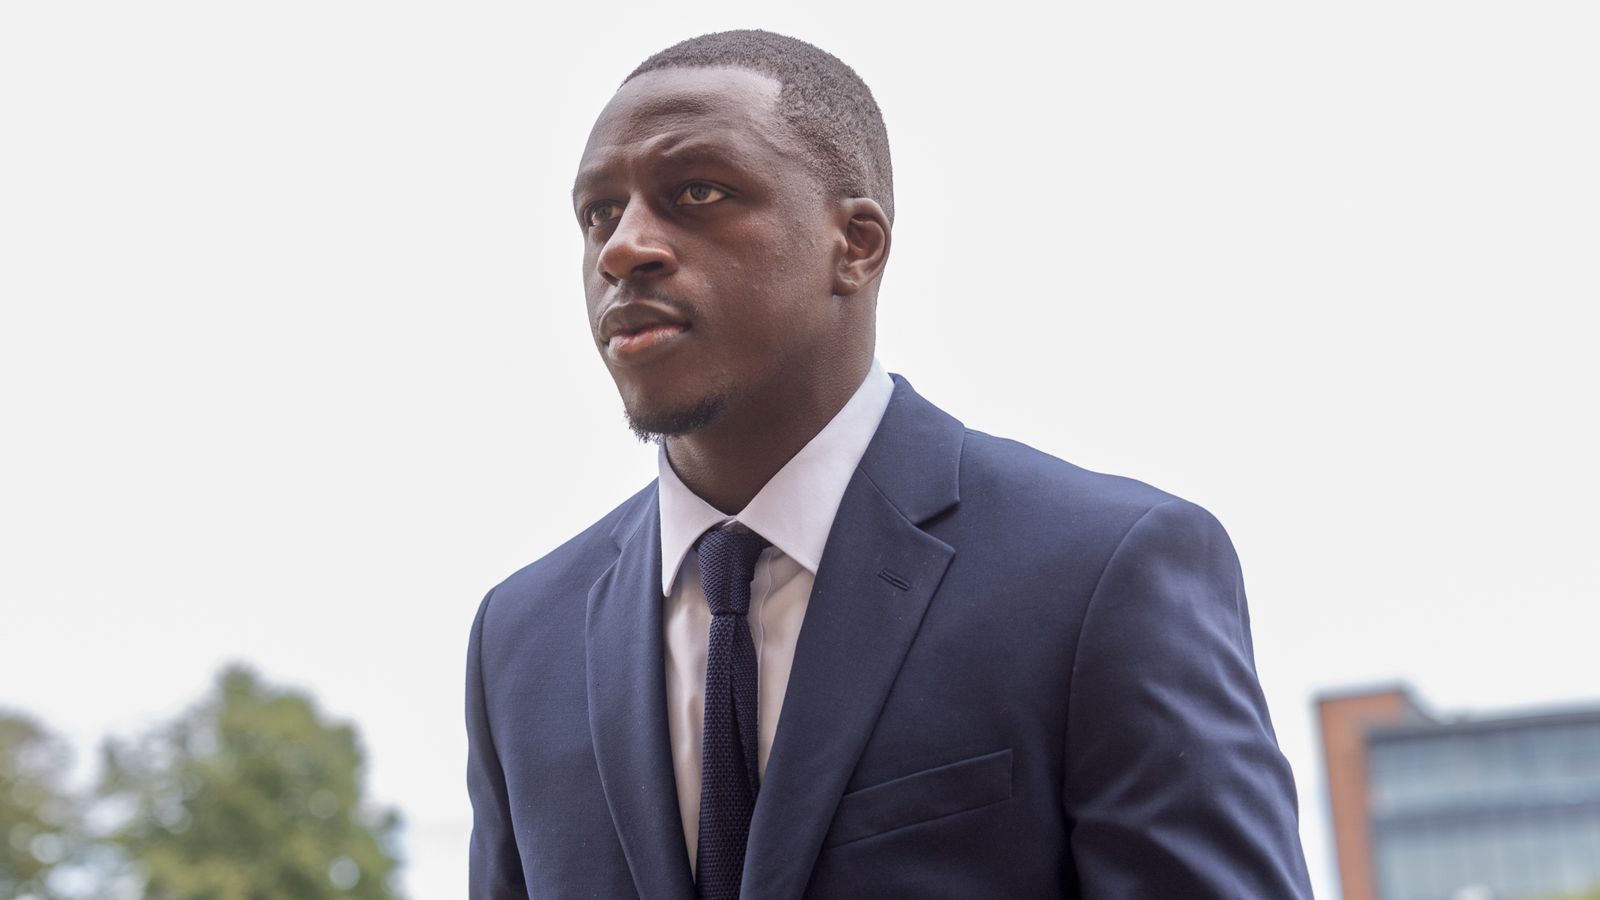 Man City Faces Legal Action from Benjamin Mendy over Unpaid Wages, Alleges Football News